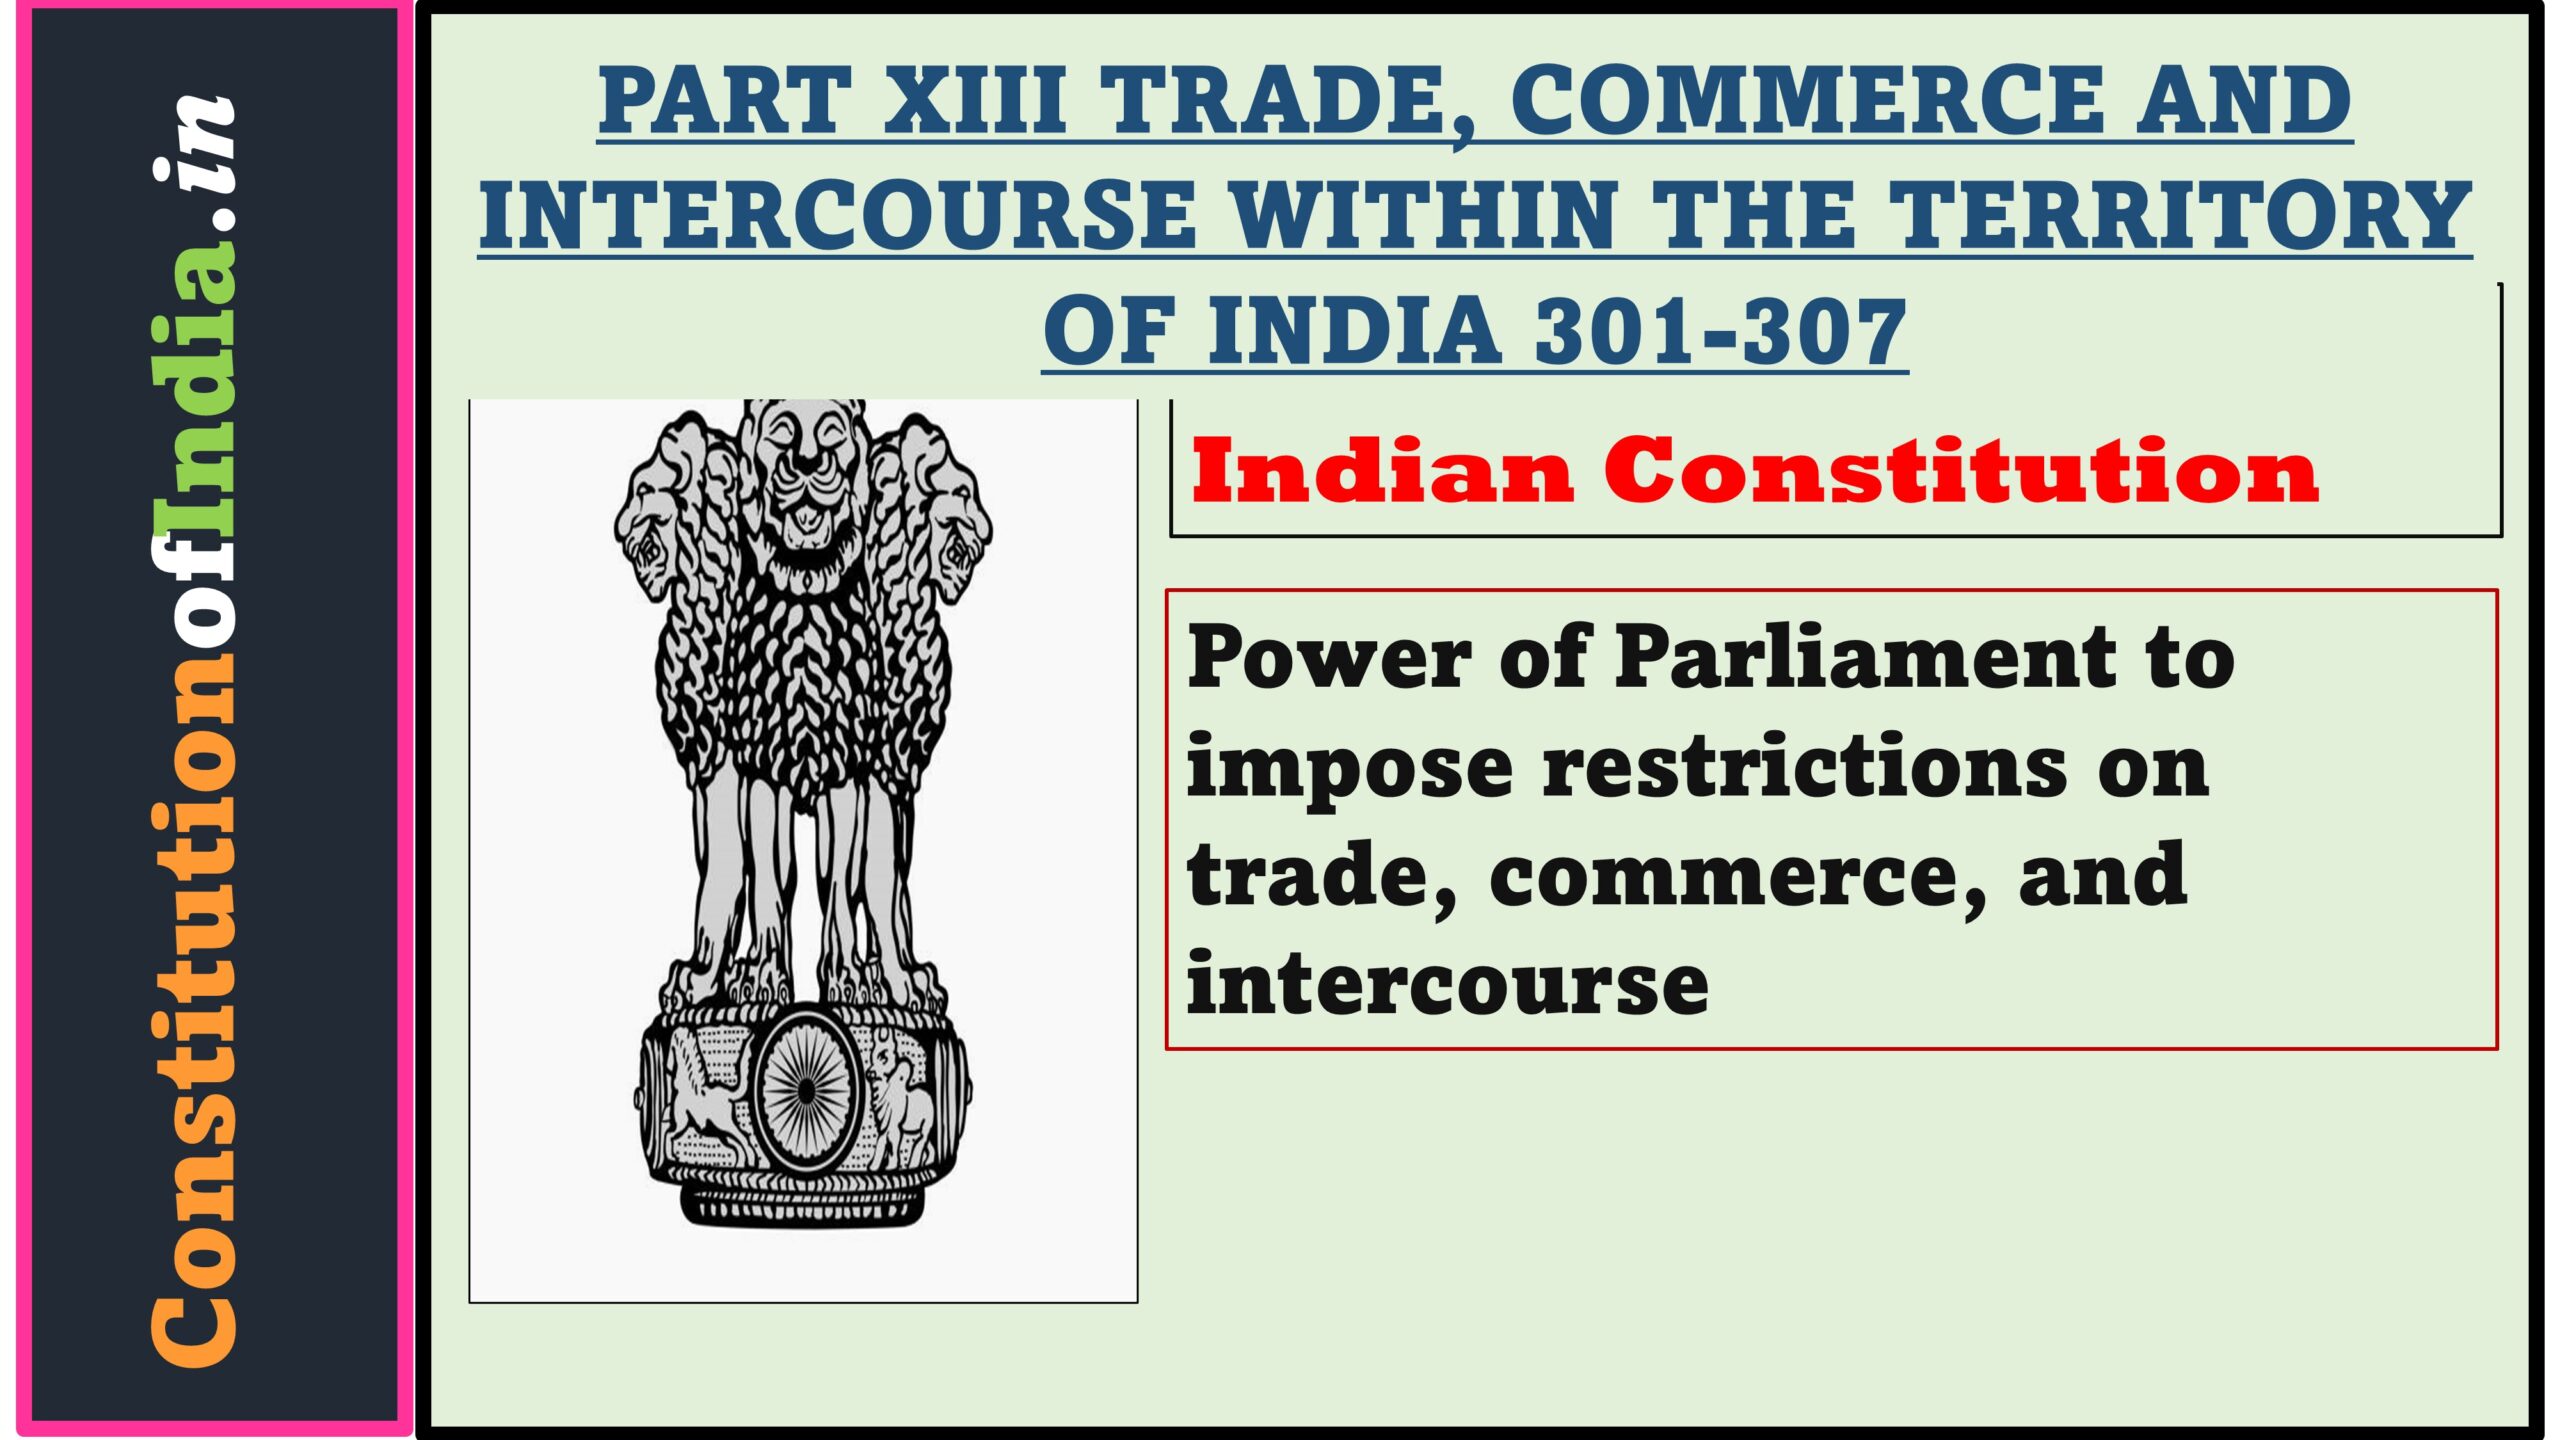 Article 302 of The Indian Constitution